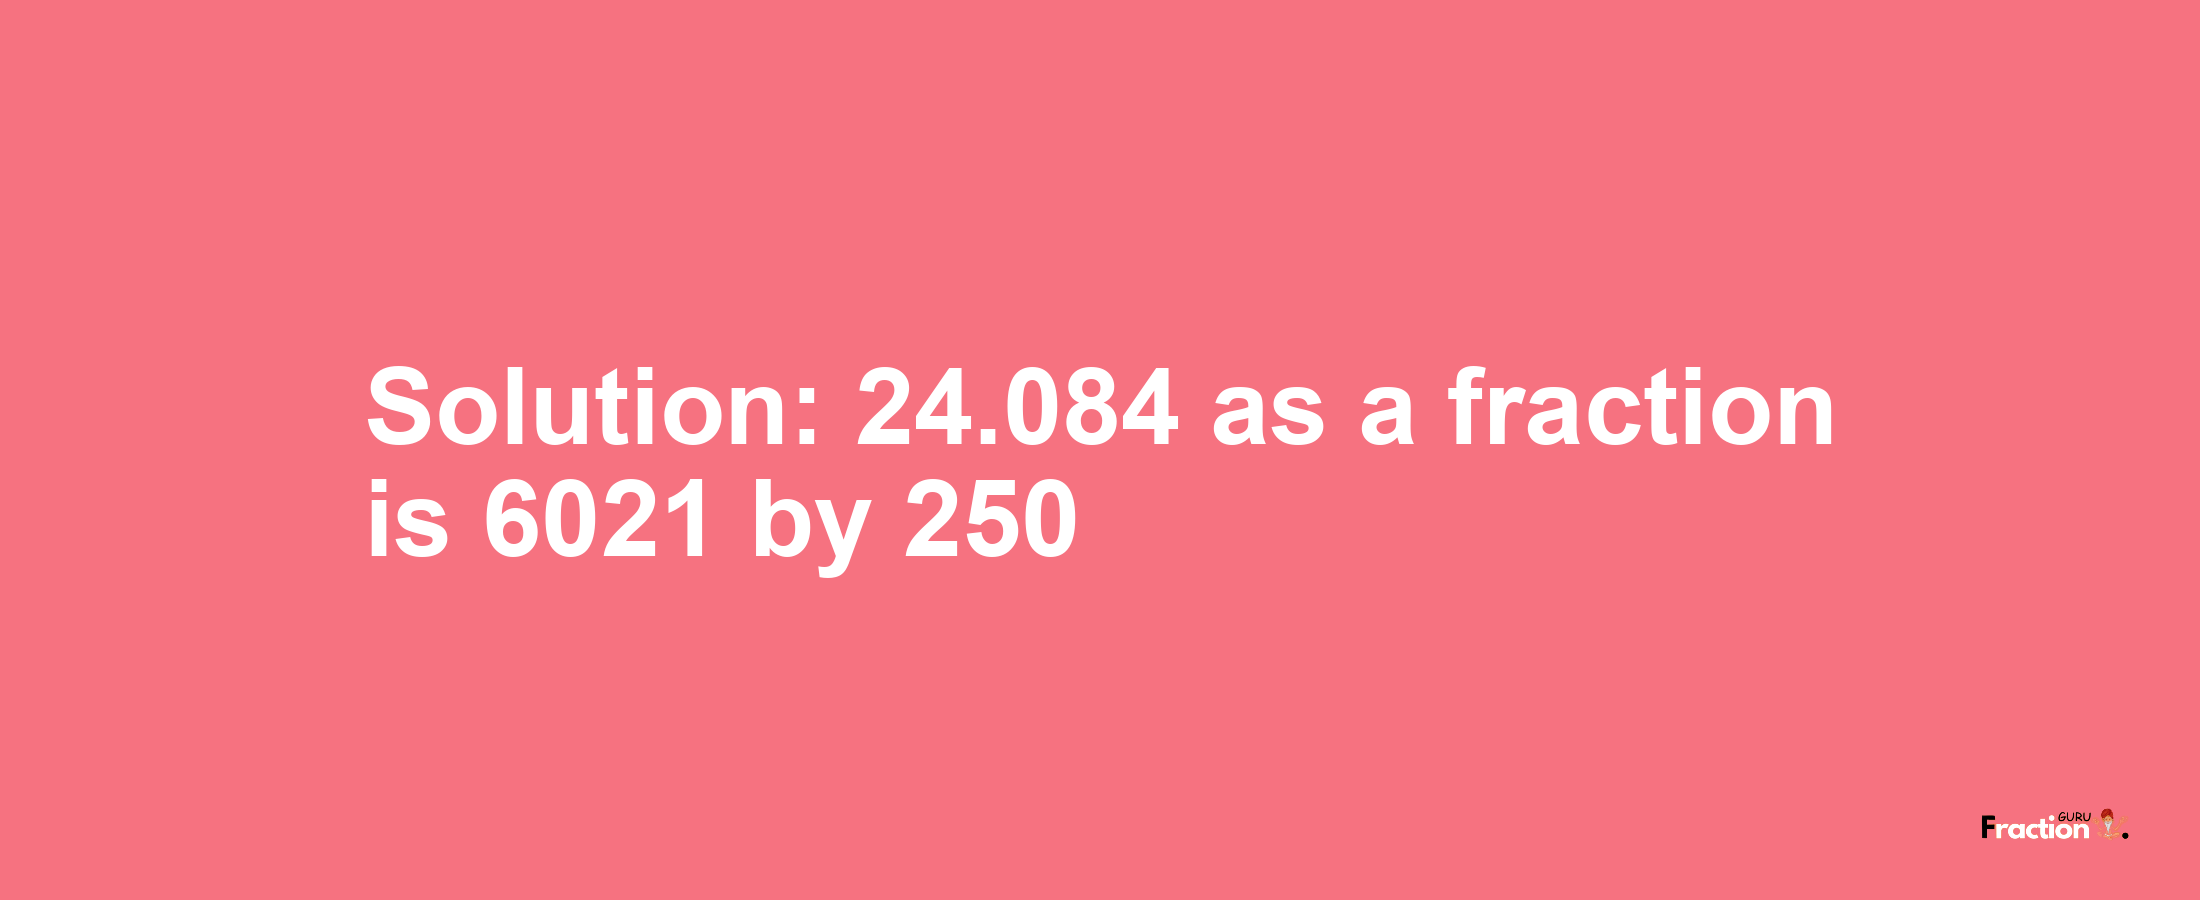 Solution:24.084 as a fraction is 6021/250